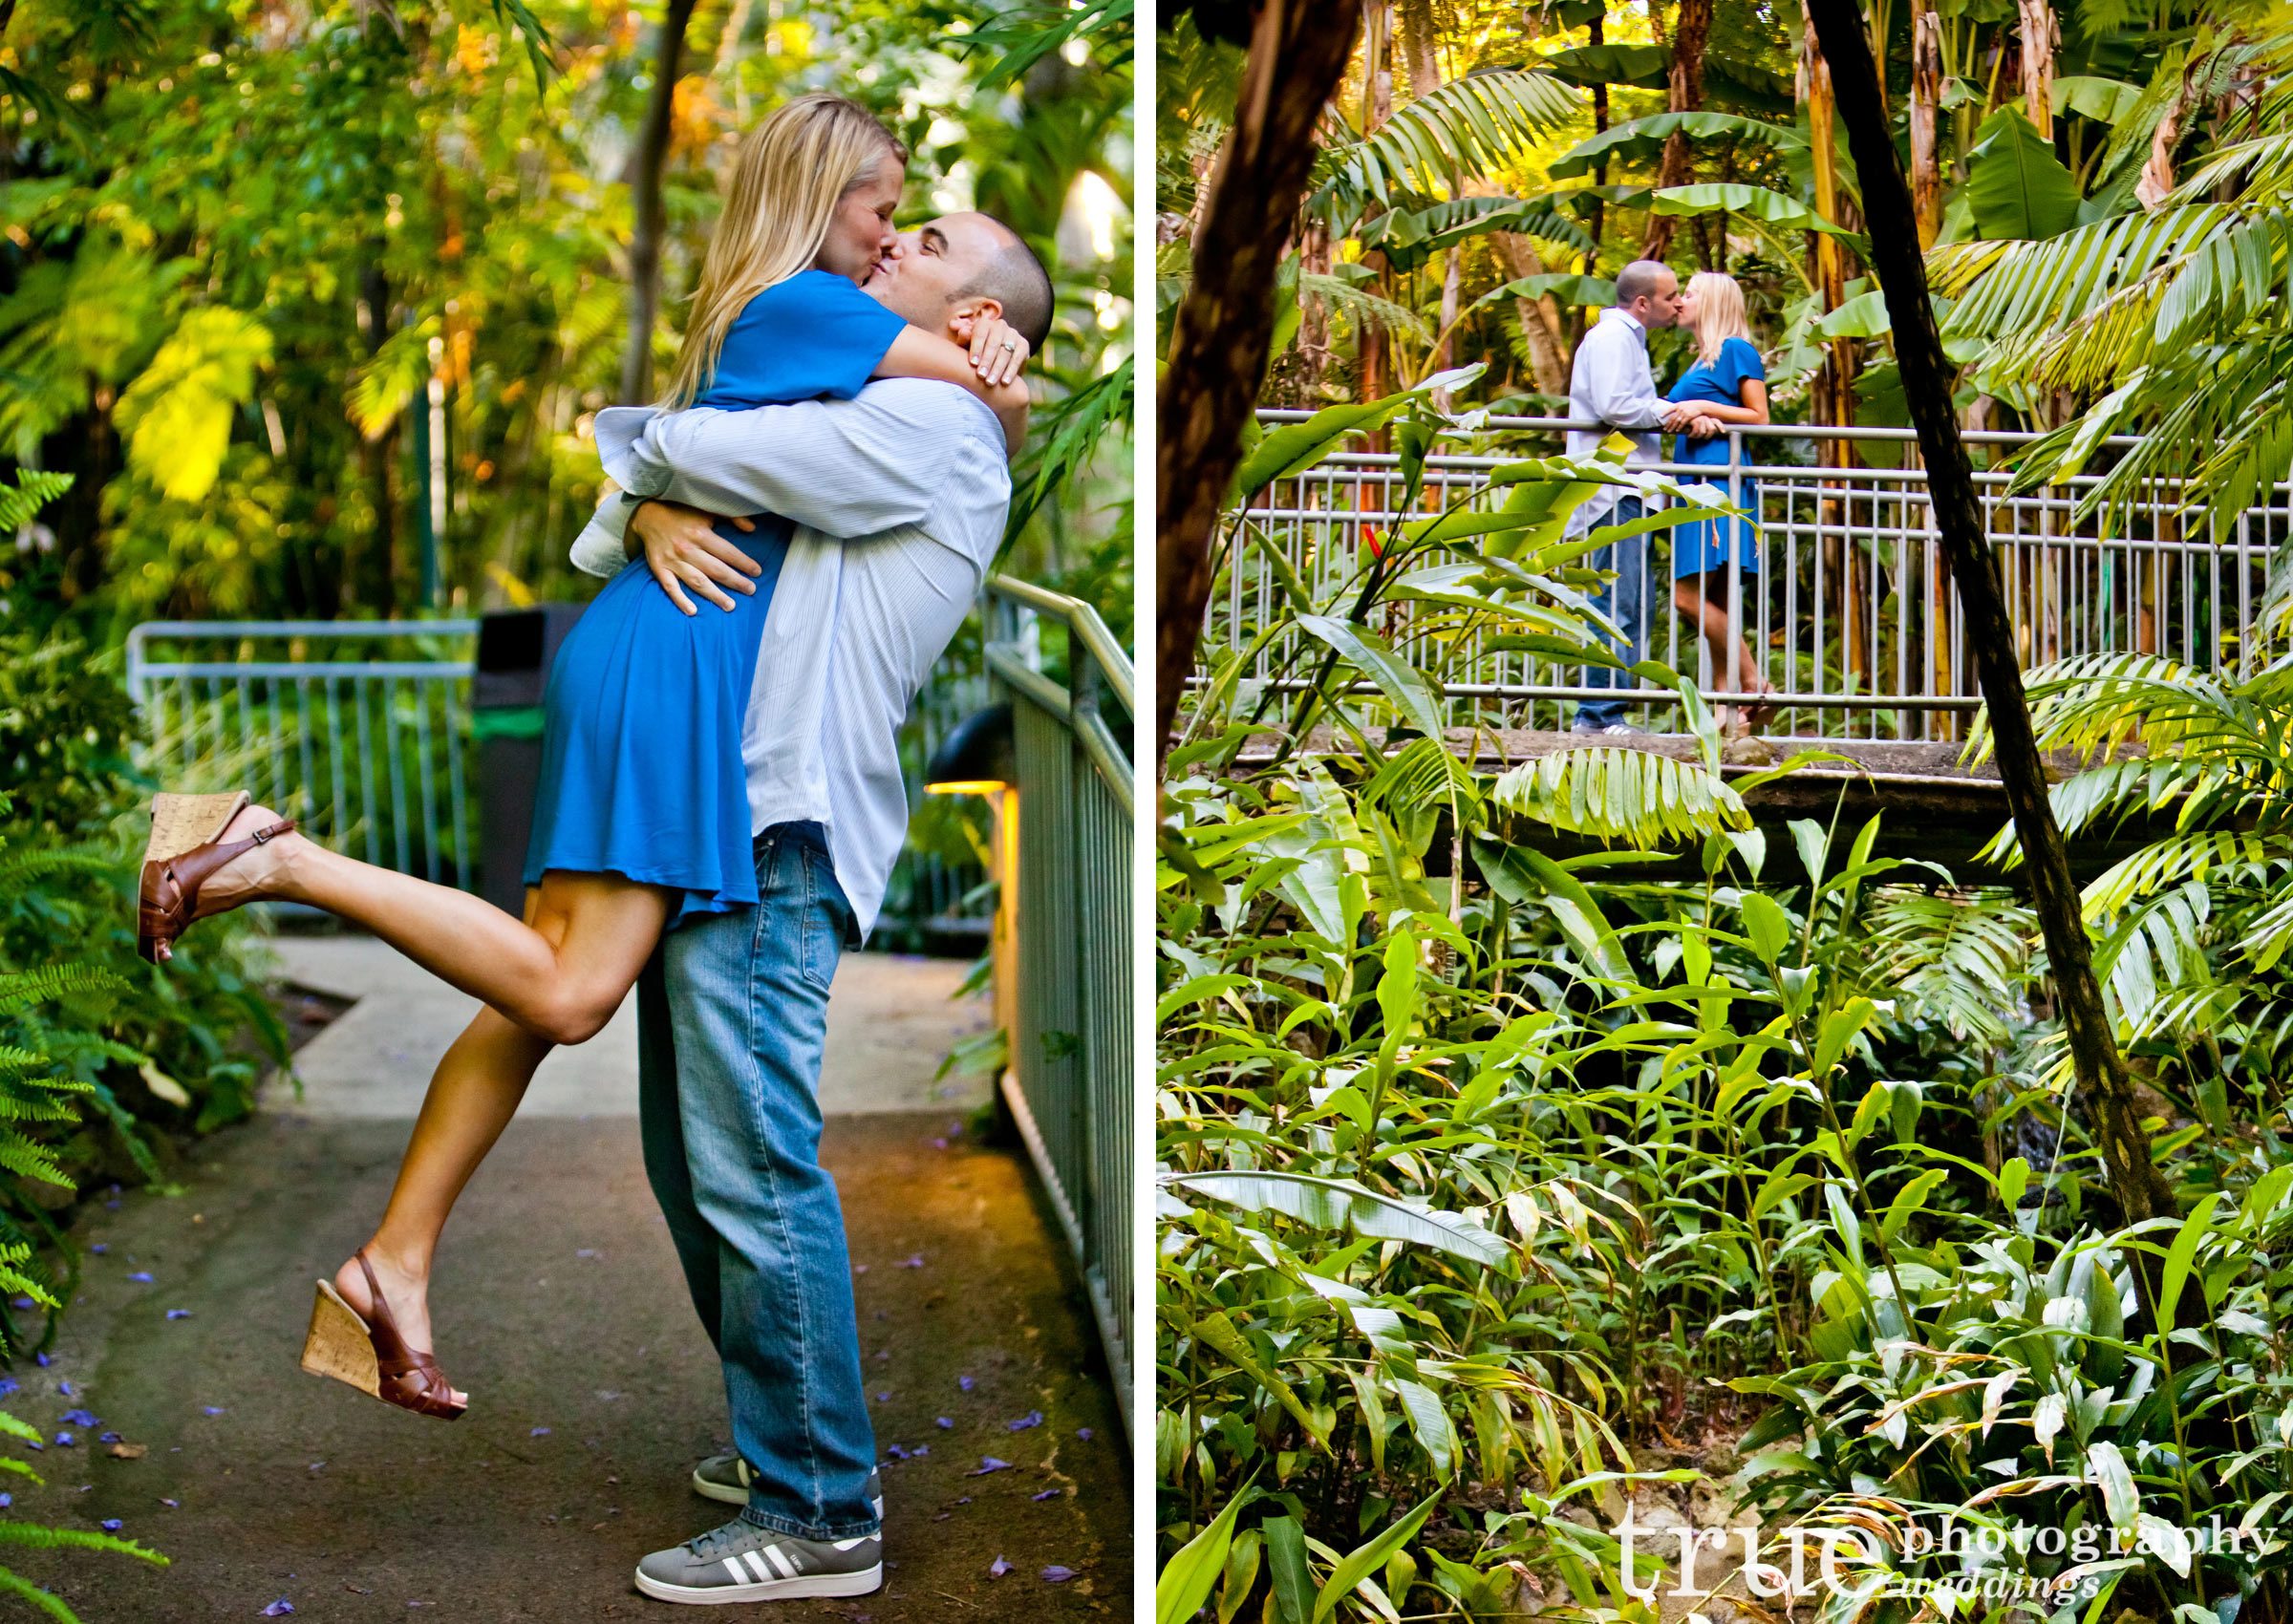 Kiss in the jungle at the Zoo